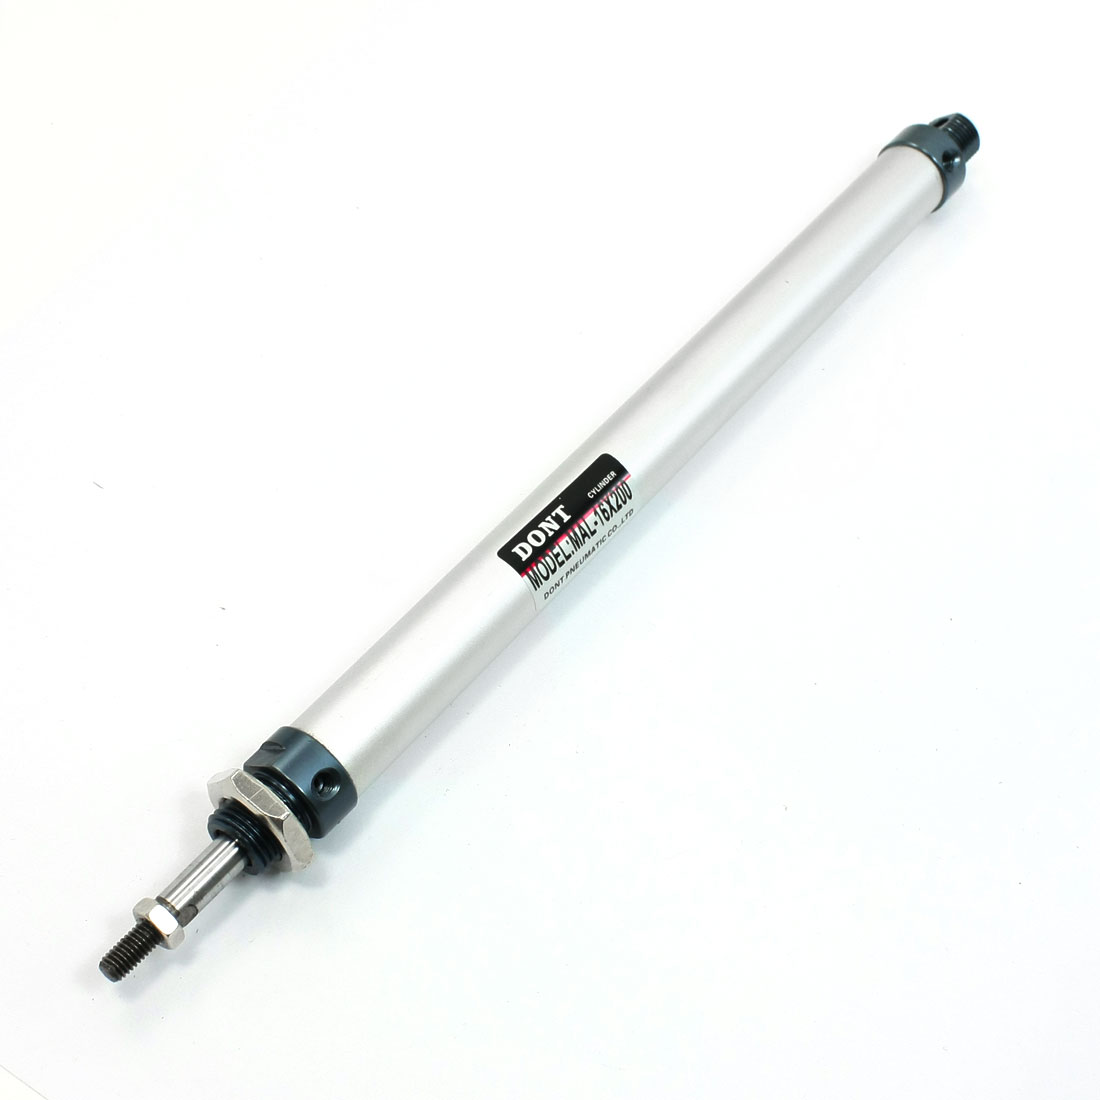 Unique Bargains MAL Series 16mm x 200mm Single Rod Double Action Pneumatic Air Cylinder